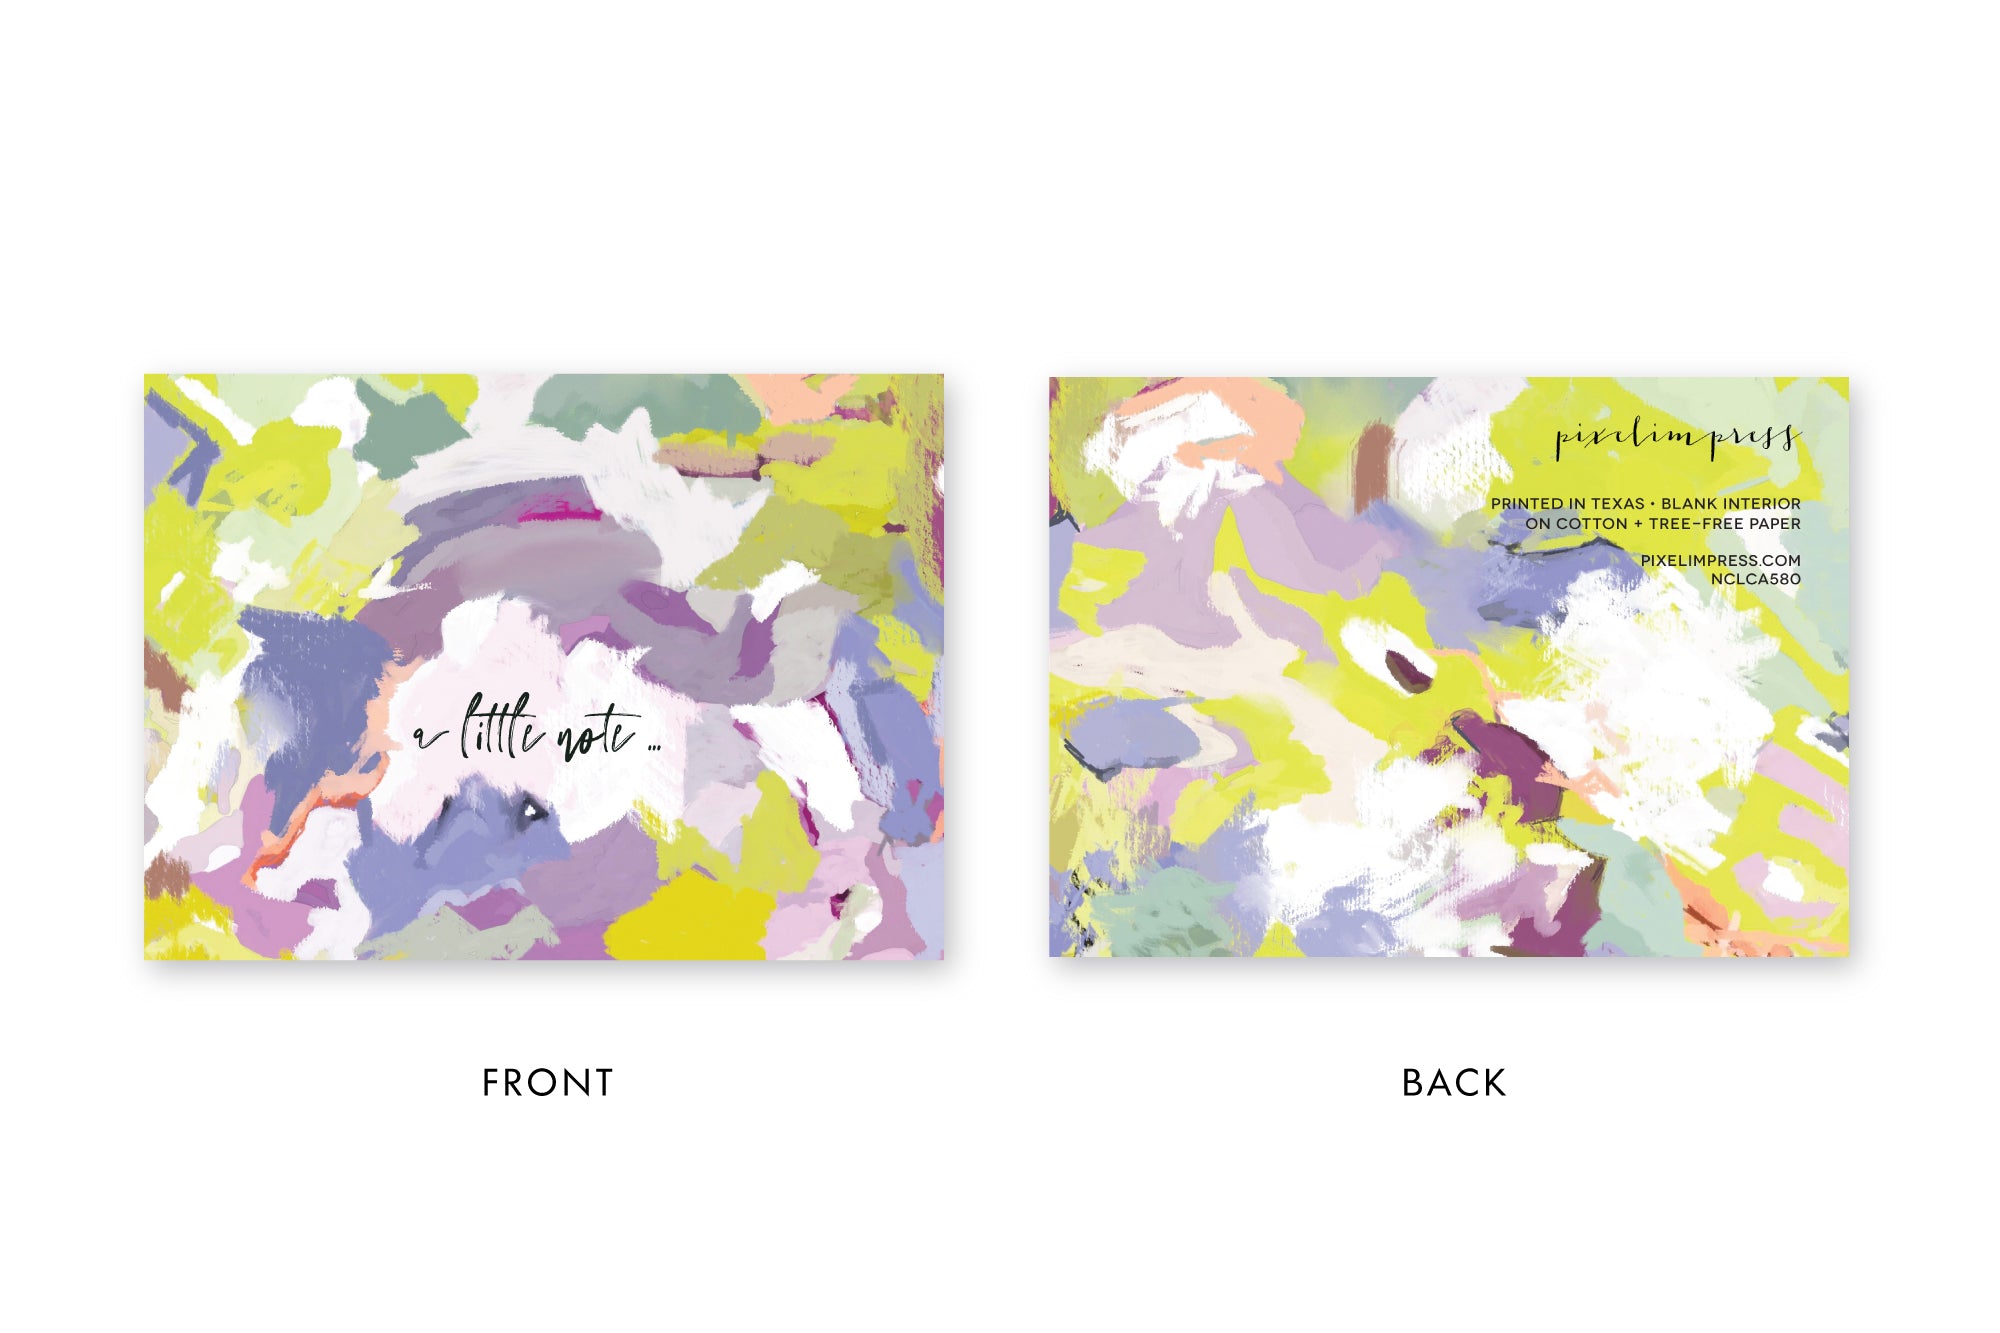 Bright, colorful notecard in lilacs, coral, chartreuse abstract pattern with text "a little note ..." with white envelope